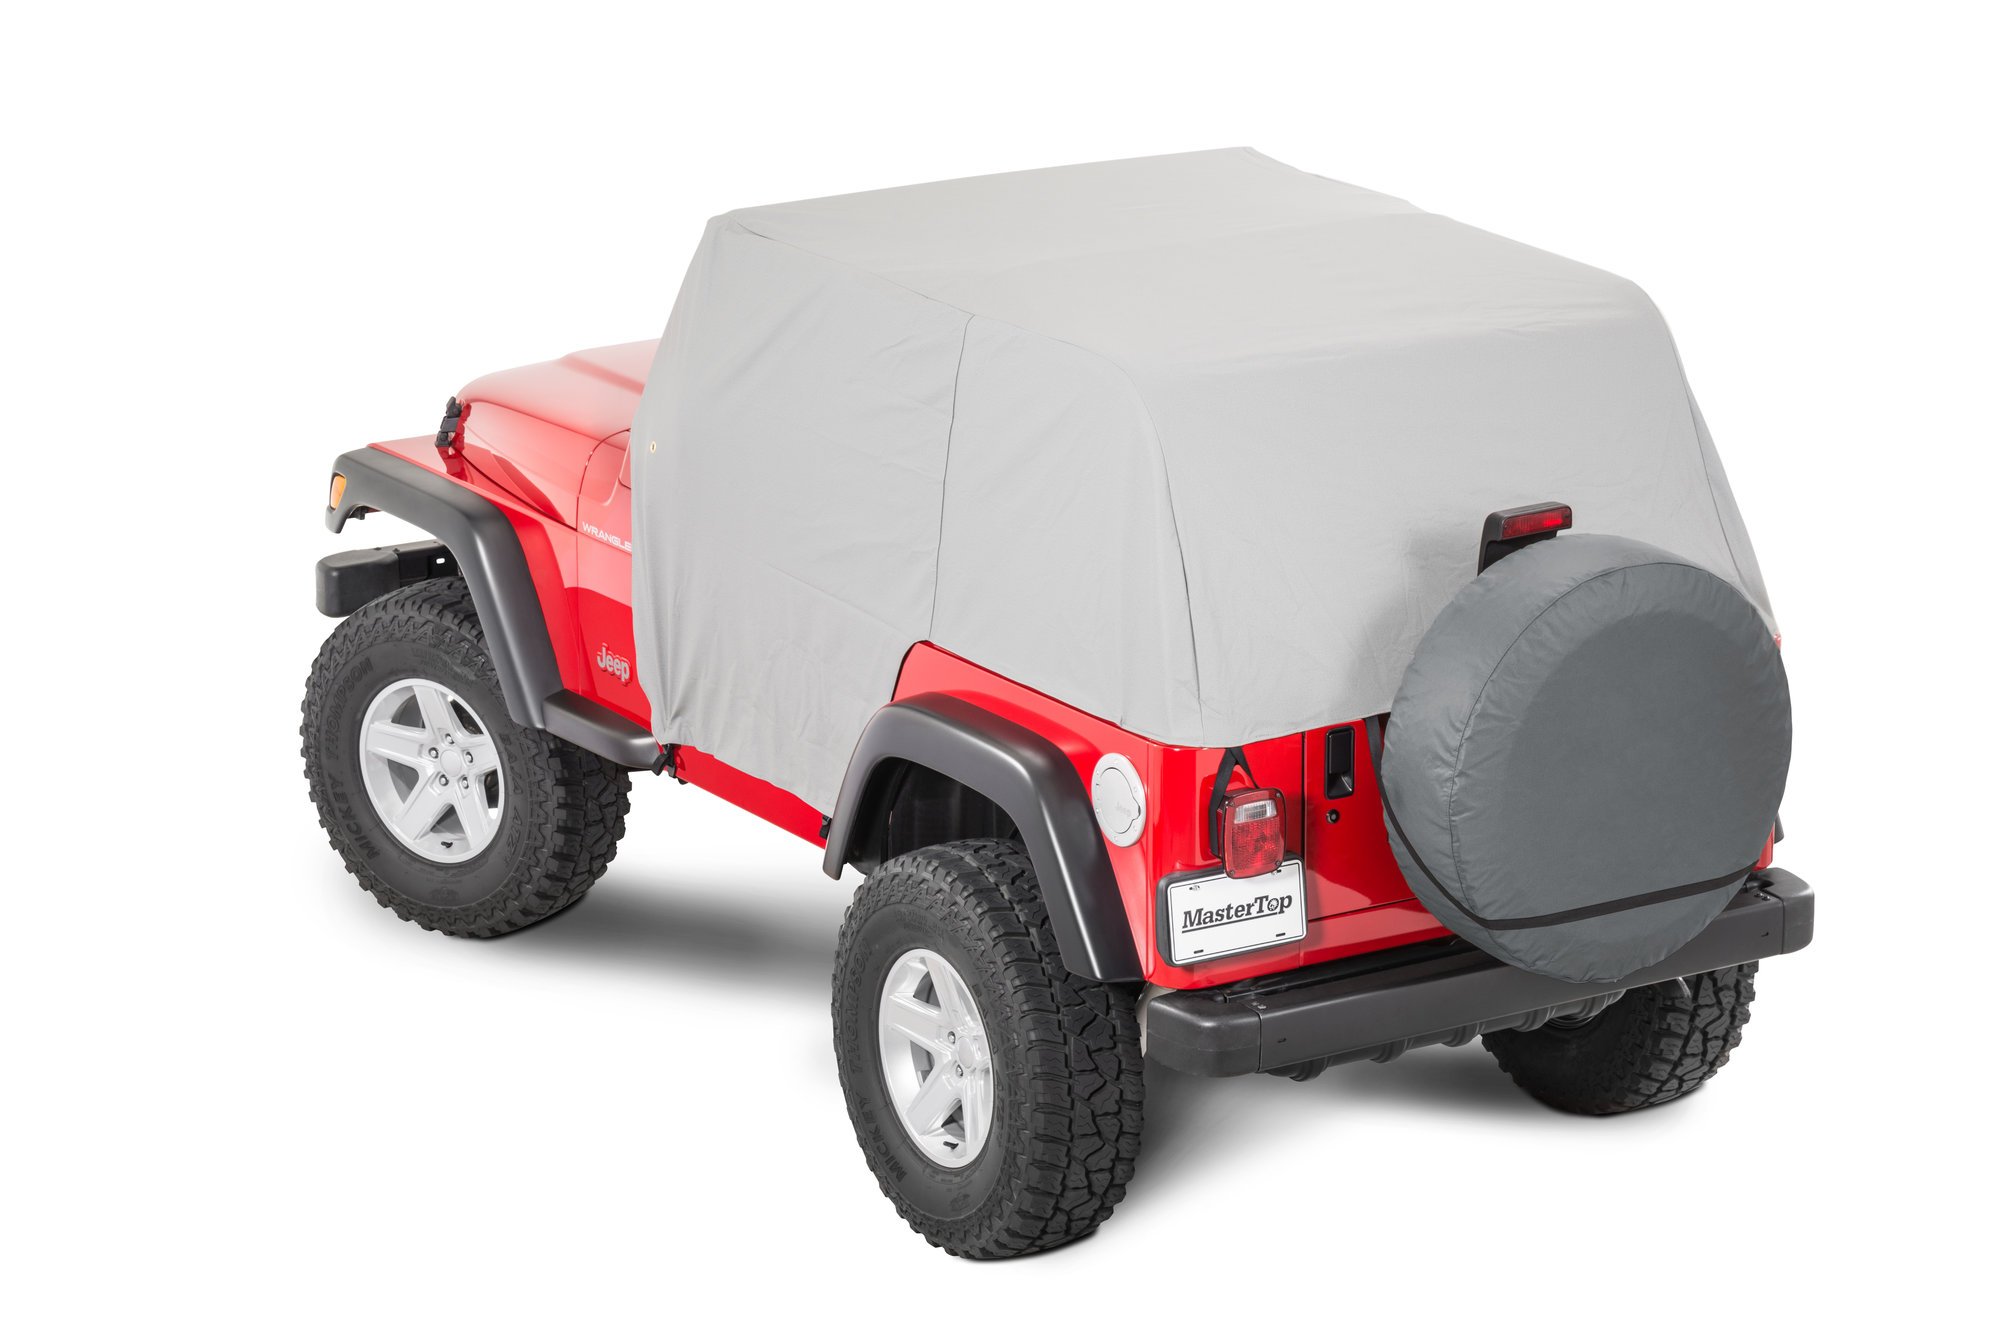 MasterTop 11110009 Cab Cover with Door Flaps for 9206 Jeep Wrangler YJ & TJ Quadratec